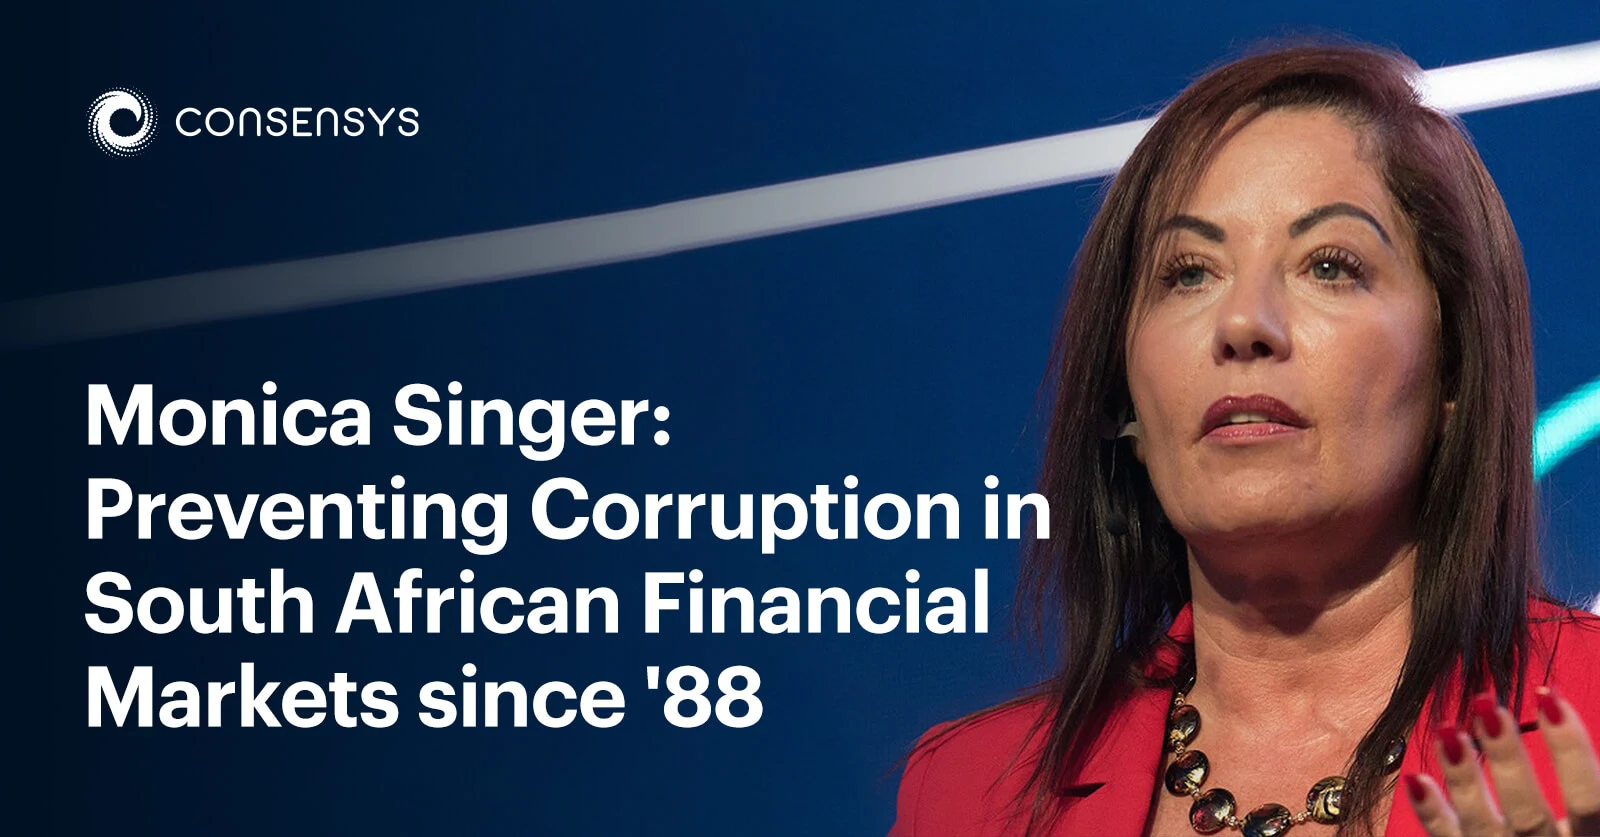 Image: Preventing Corruption in Financial Markets: Monica Singer’s Story